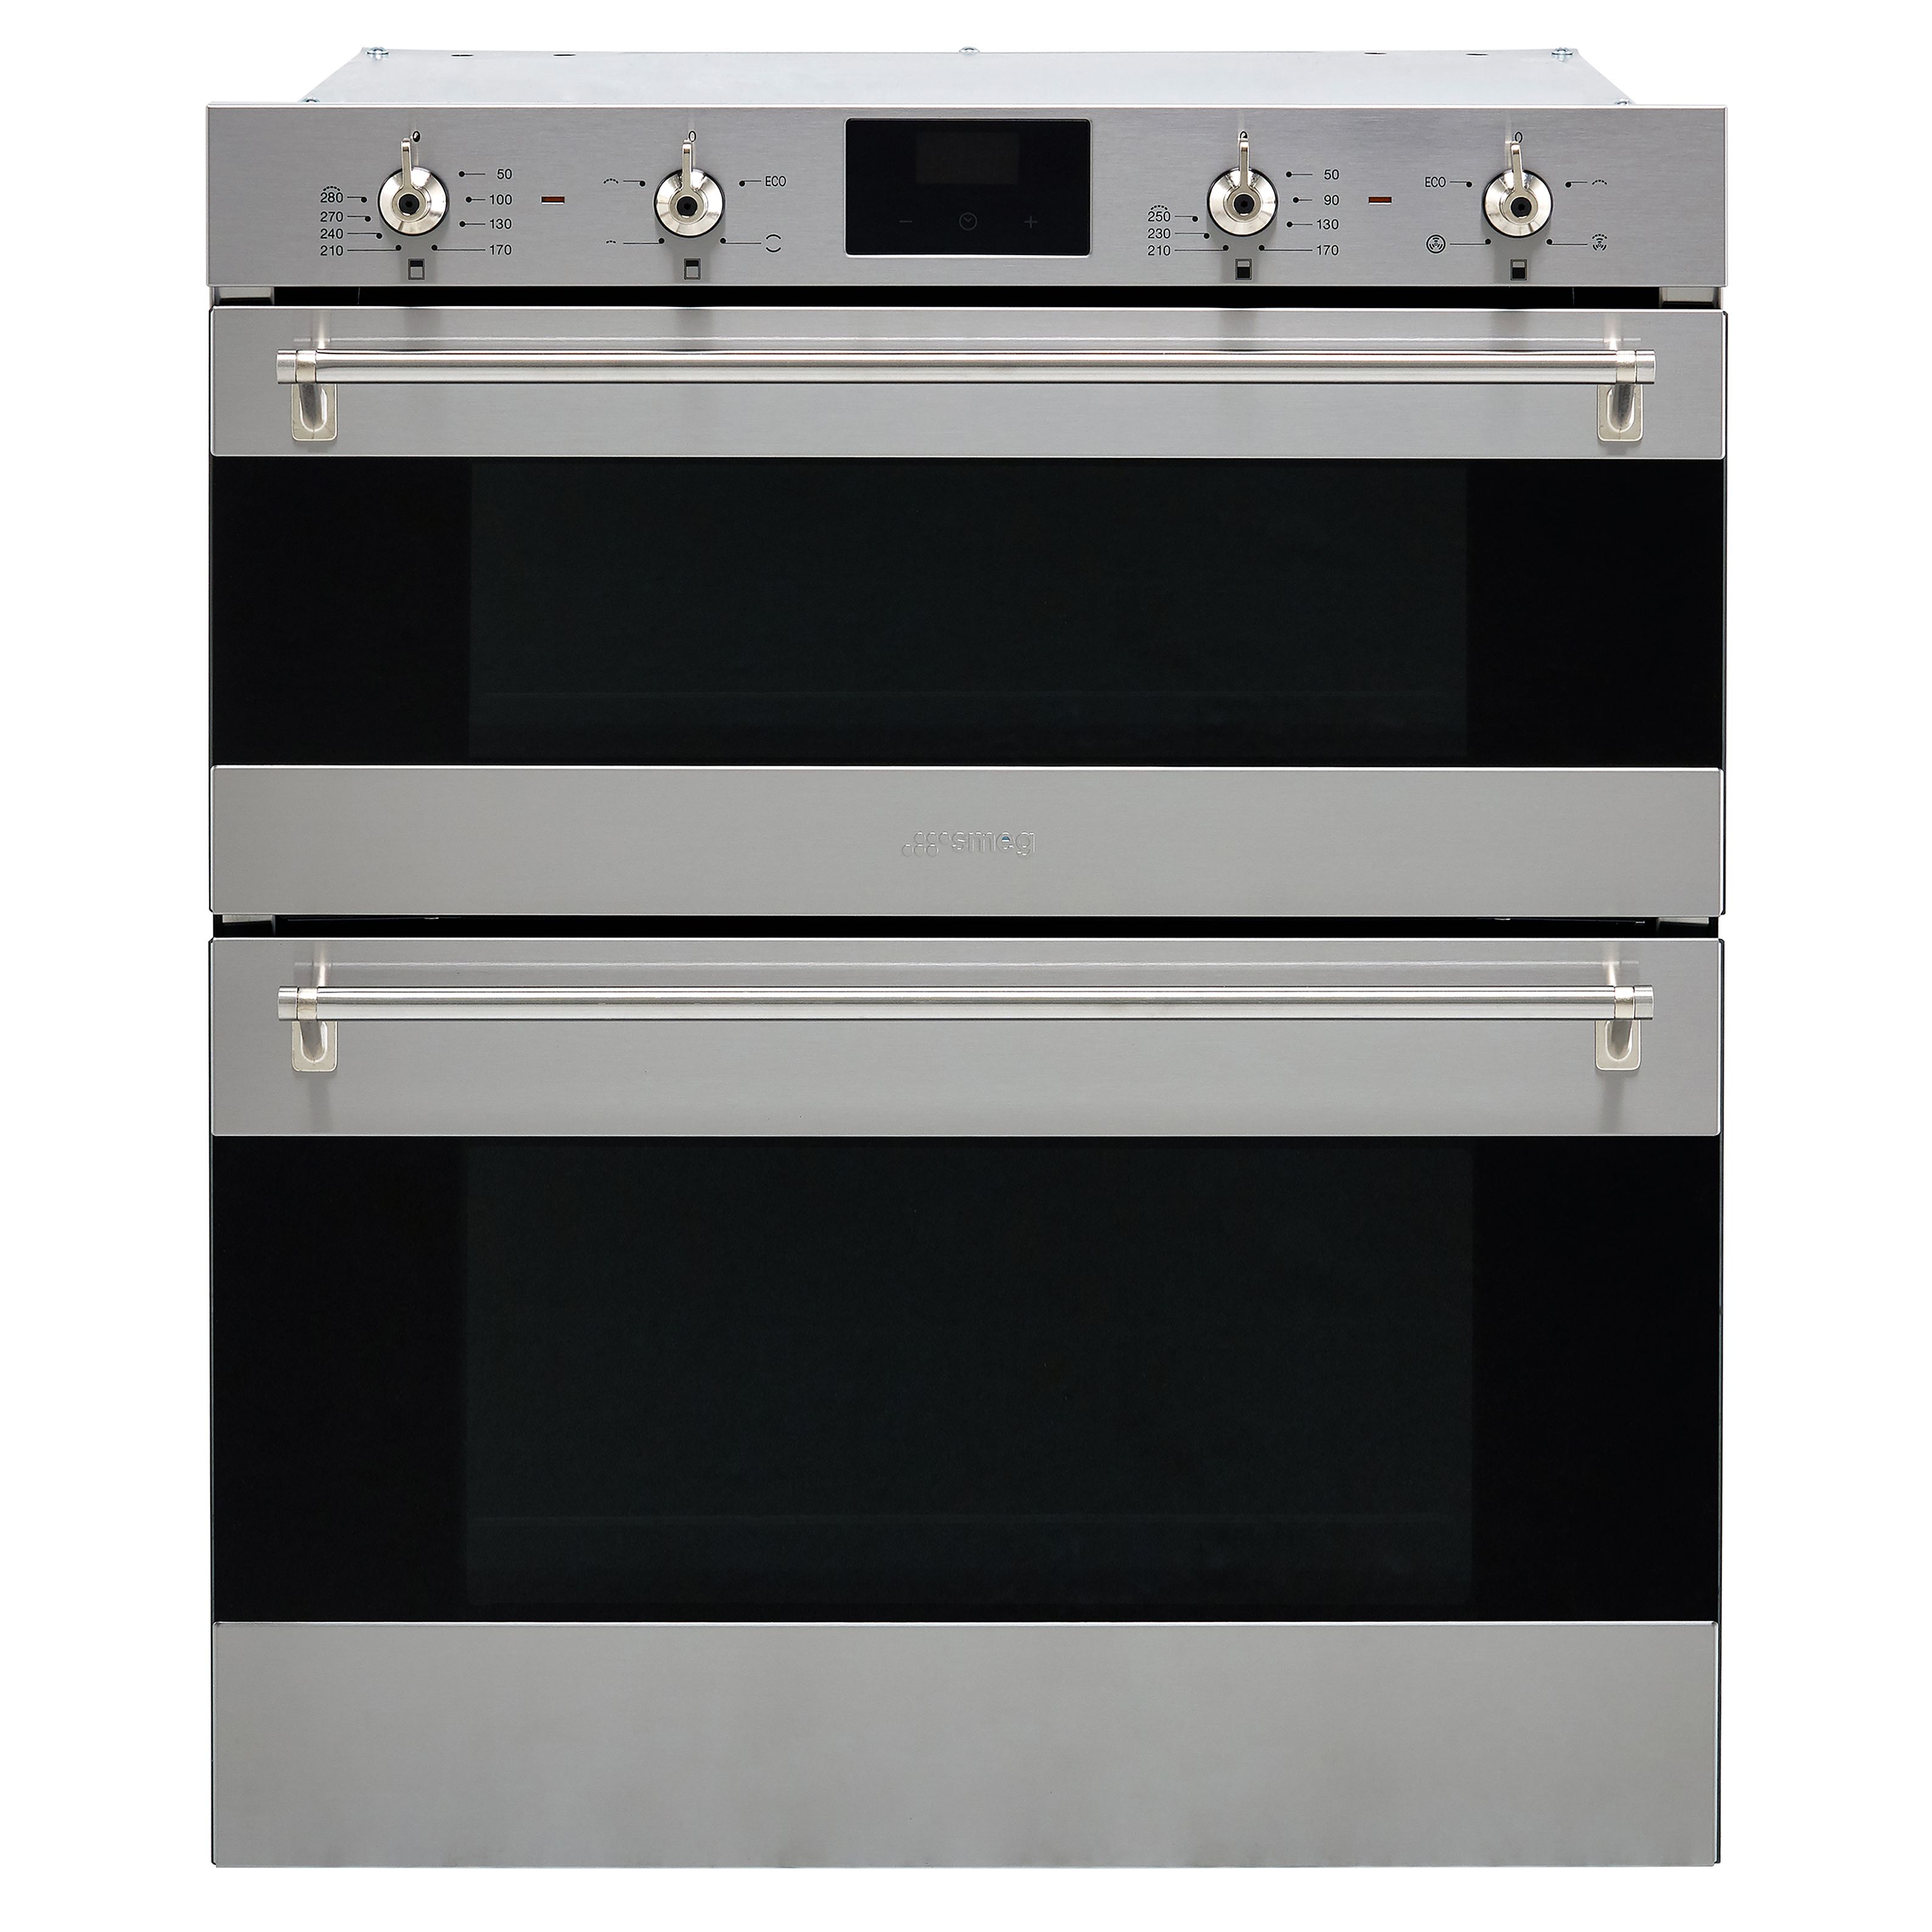 Smeg DUSF6300X Built-in Electric Double oven - Stainless steel effect